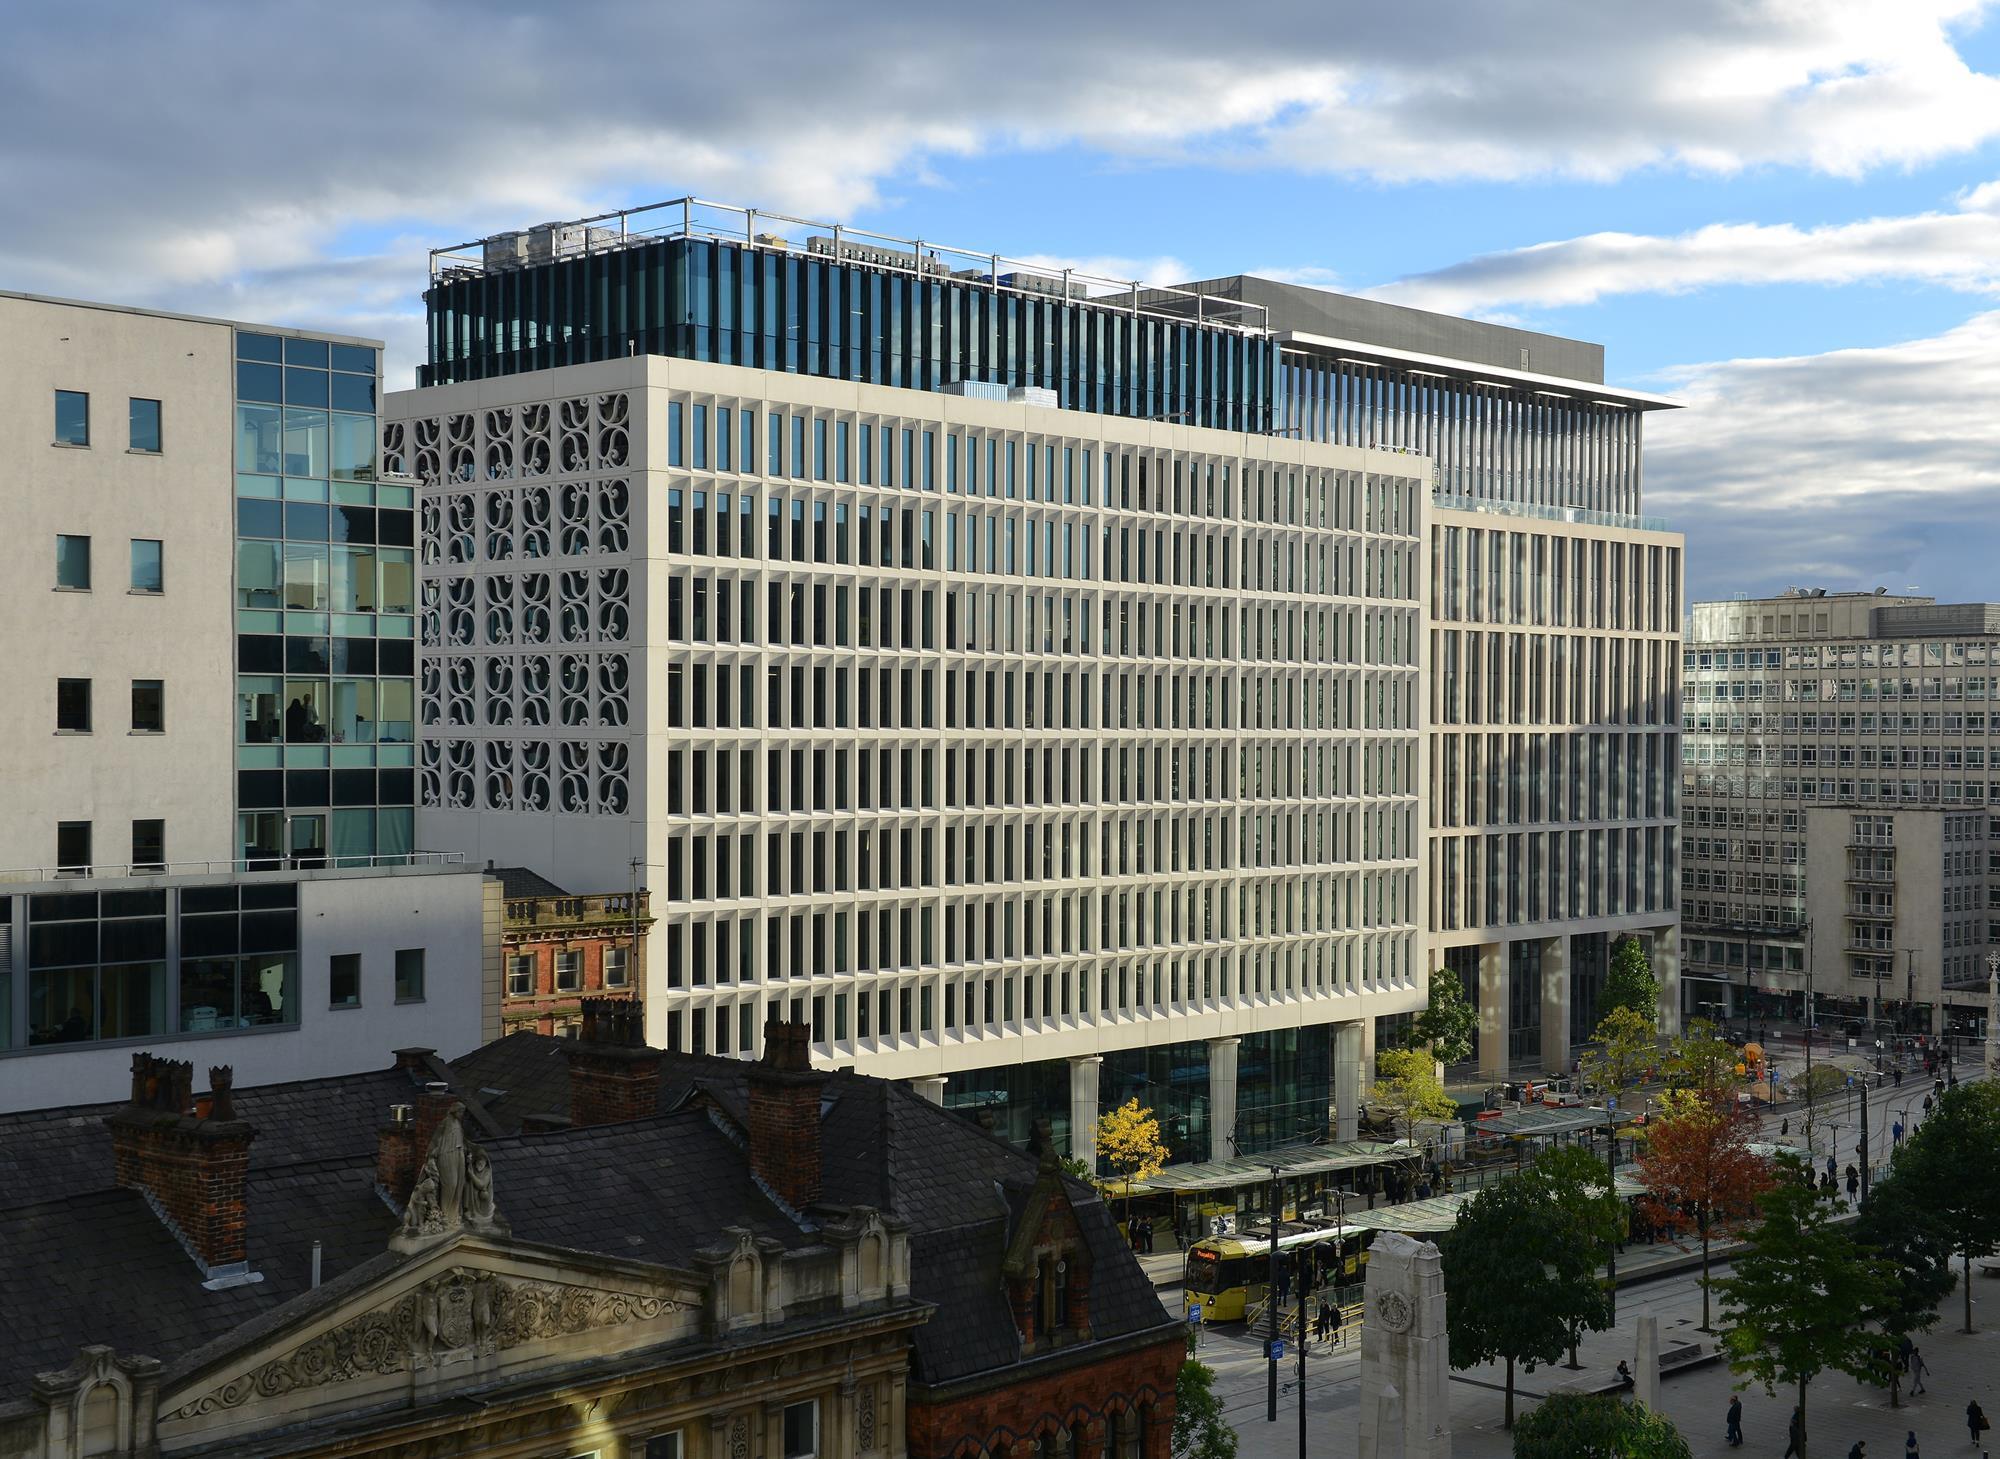 DWP – Two St Peter’s Square – Design Manchester2000 x 1459